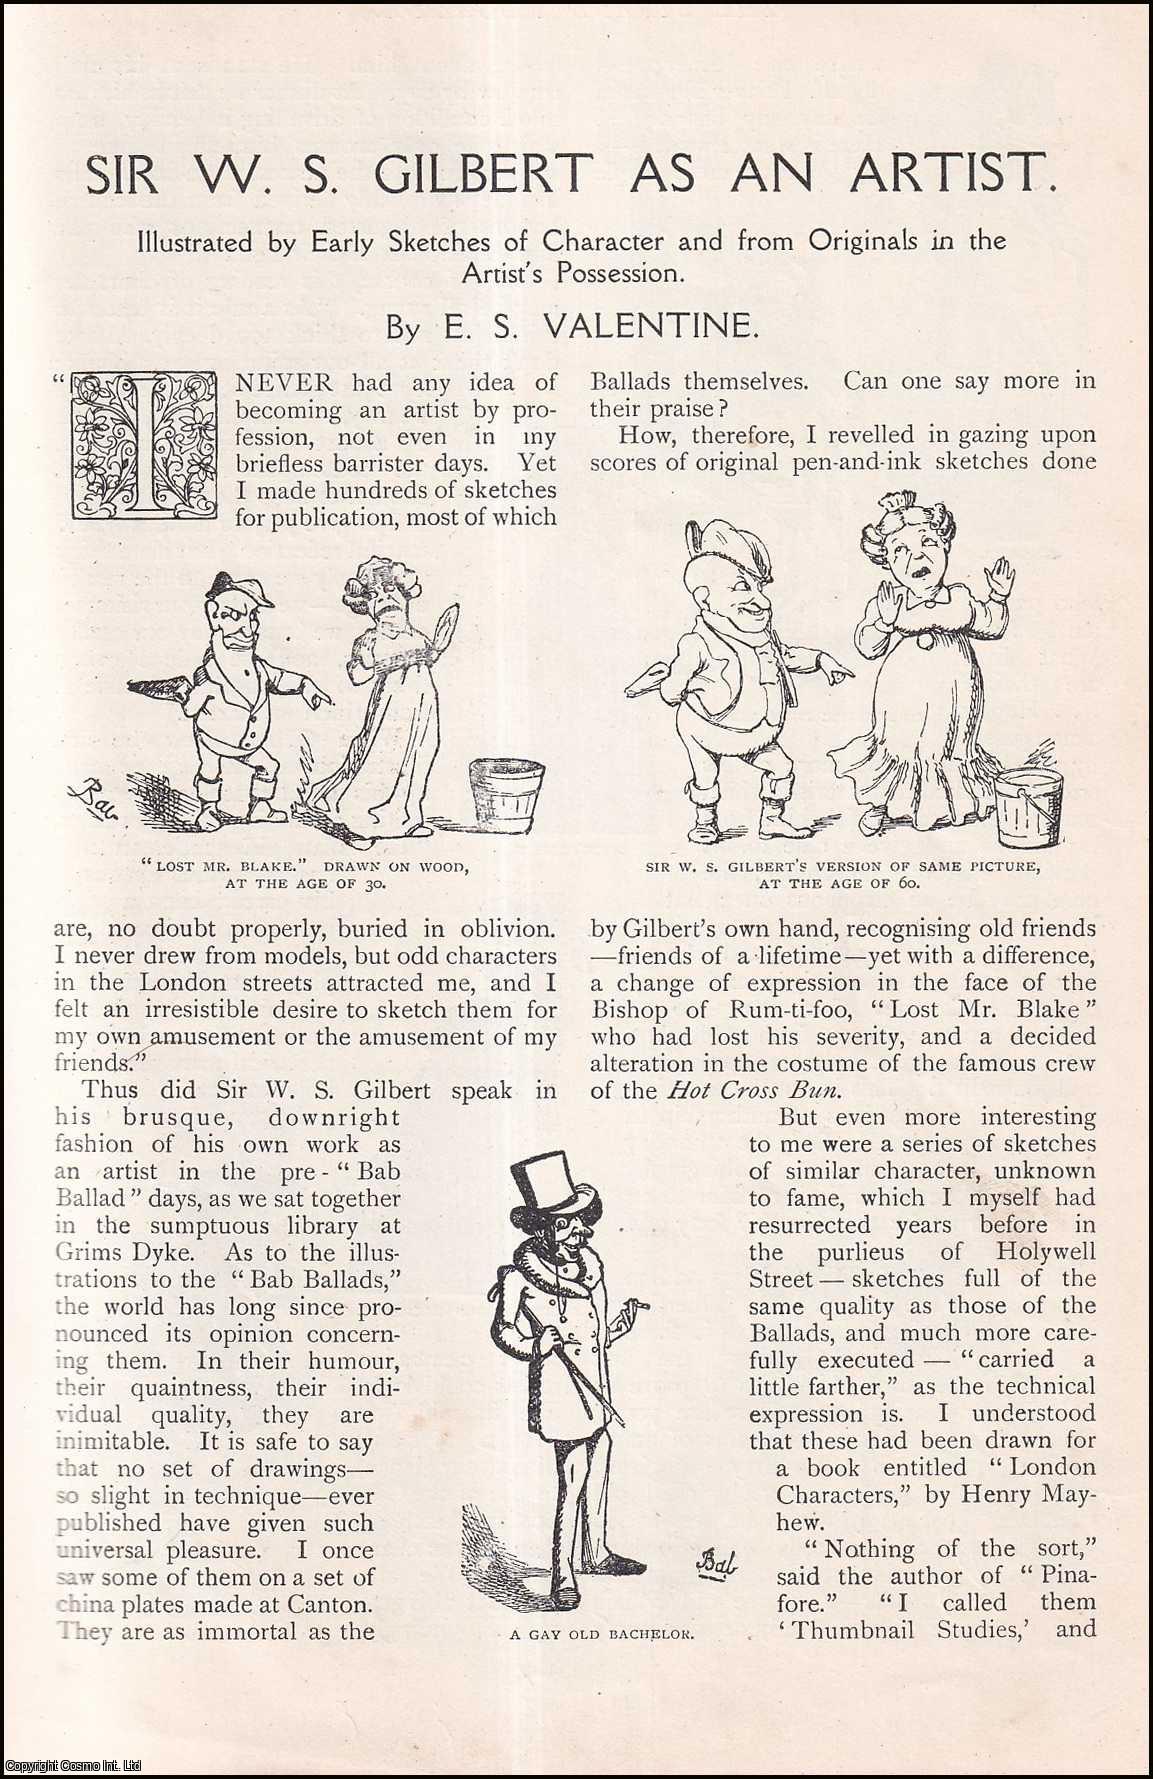 E.S. Valentine - Sir W. S. Gilbert as an Artist. Illustrated by Early Sketches of Character and from Originals in the Artist's Possession. An original article from The Strand Magazine, 1909.